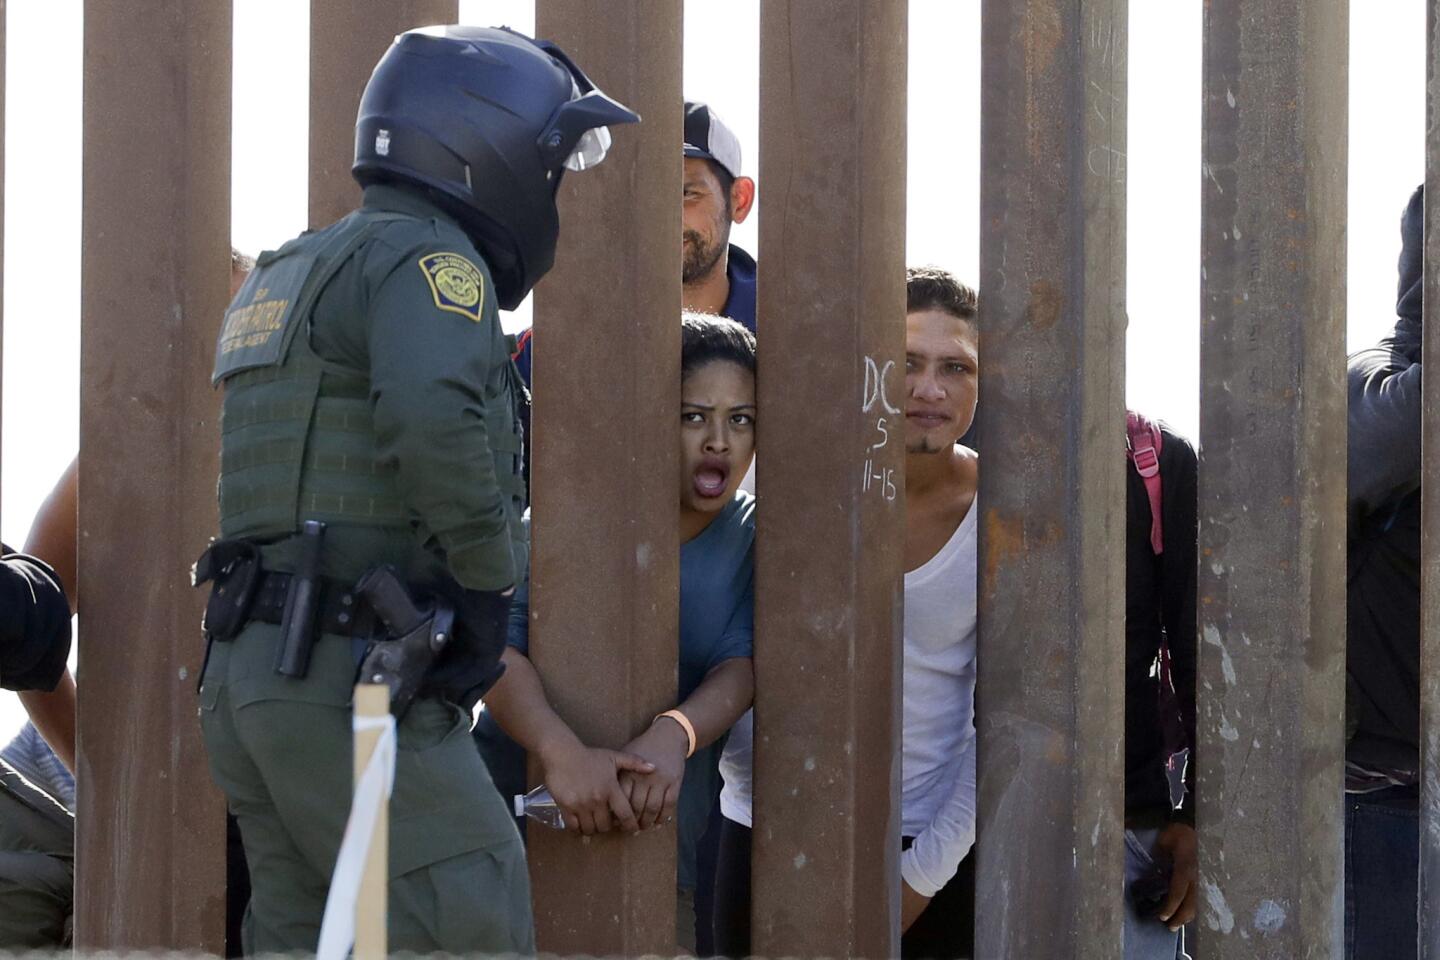 Migrants from Central America yell through a border fence between San Diego and Tijuana at a U.S. Customs and Border Patrol agent after he pulled down a banner on Nov. 25, 2018.